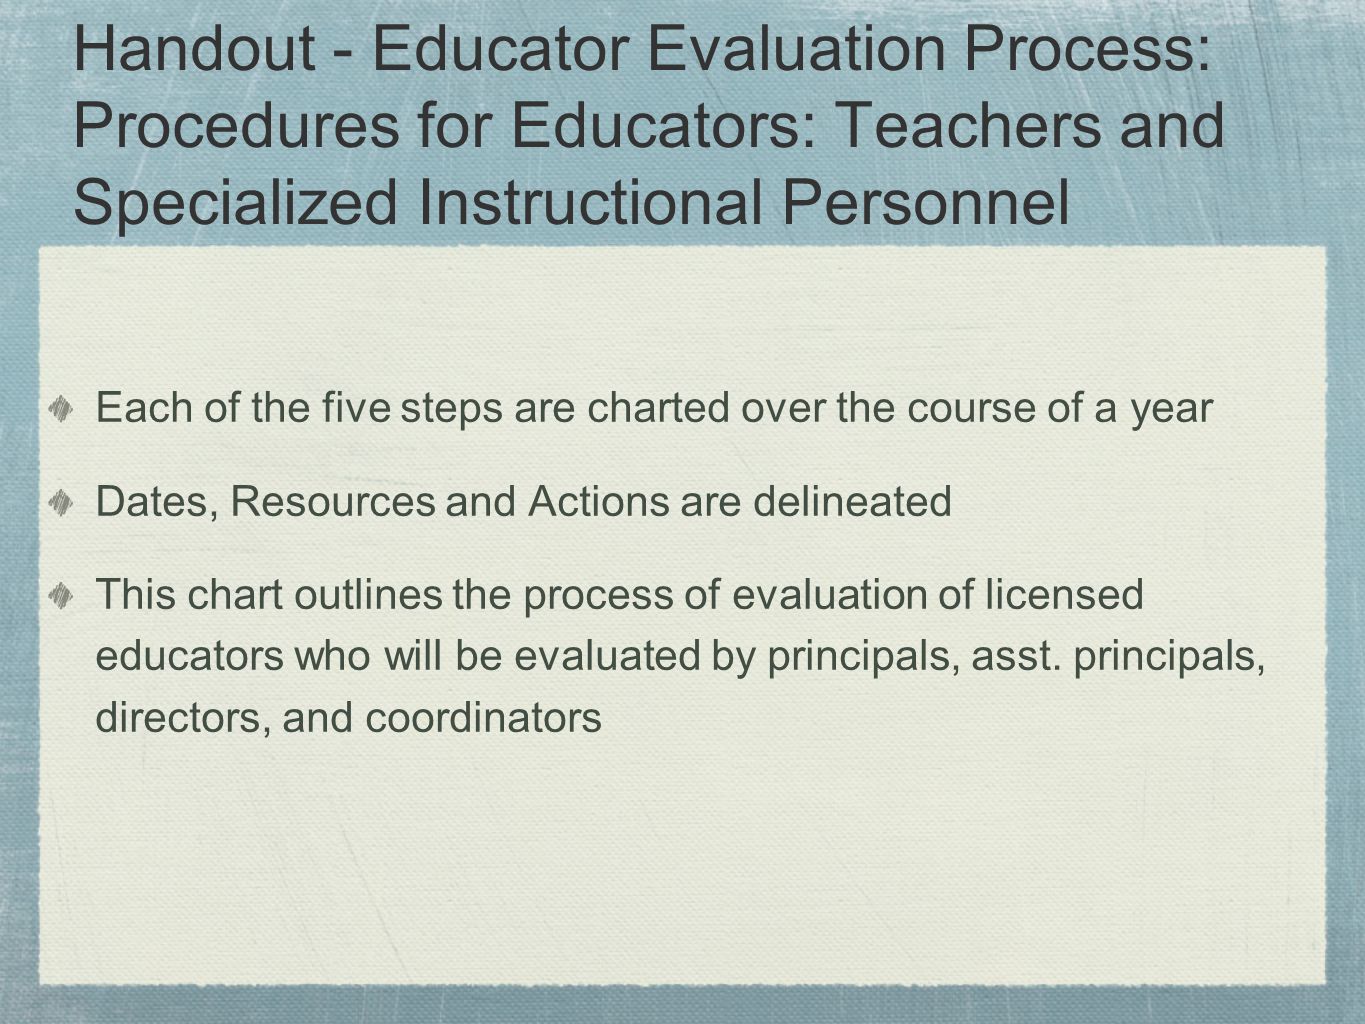 Handout - Educator Evaluation Process: Procedures for Educators: Teachers and Specialized Instructional Personnel Each of the five steps are charted over the course of a year Dates, Resources and Actions are delineated This chart outlines the process of evaluation of licensed educators who will be evaluated by principals, asst.